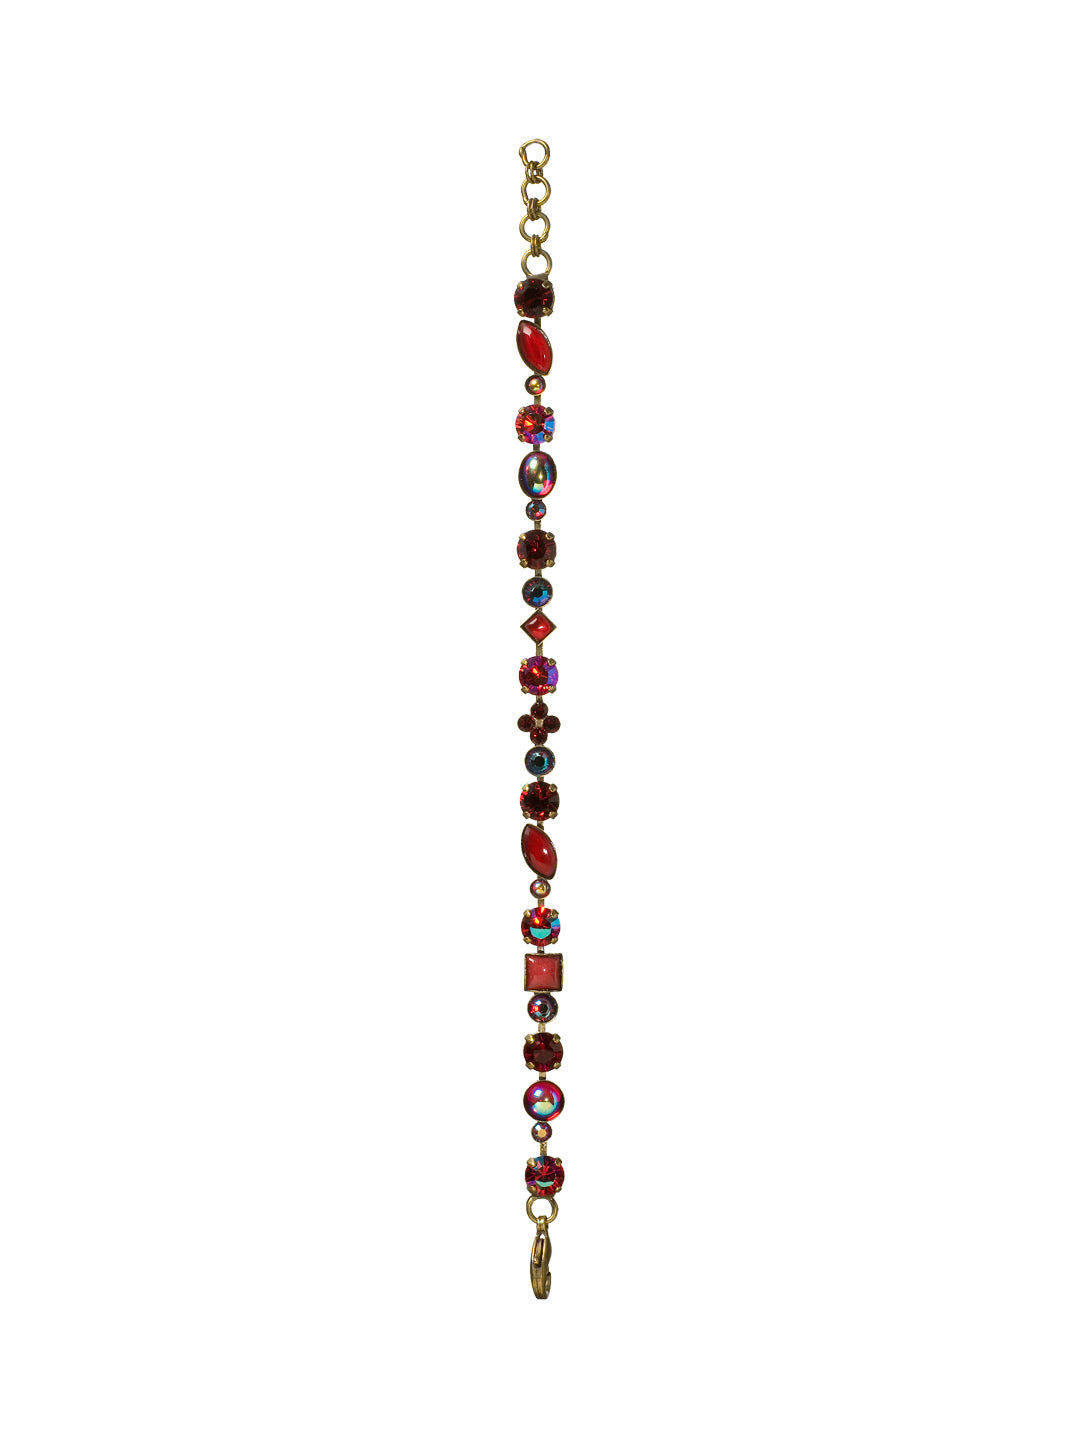 Crystal and Cabochon Tennis Bracelet - BAQ3AGCB - All over sparkle. Alternating cabochons and multi-cut crystals form this effortless and classic line bracelet. From Sorrelli's Cranberry collection in our Antique Gold-tone finish.